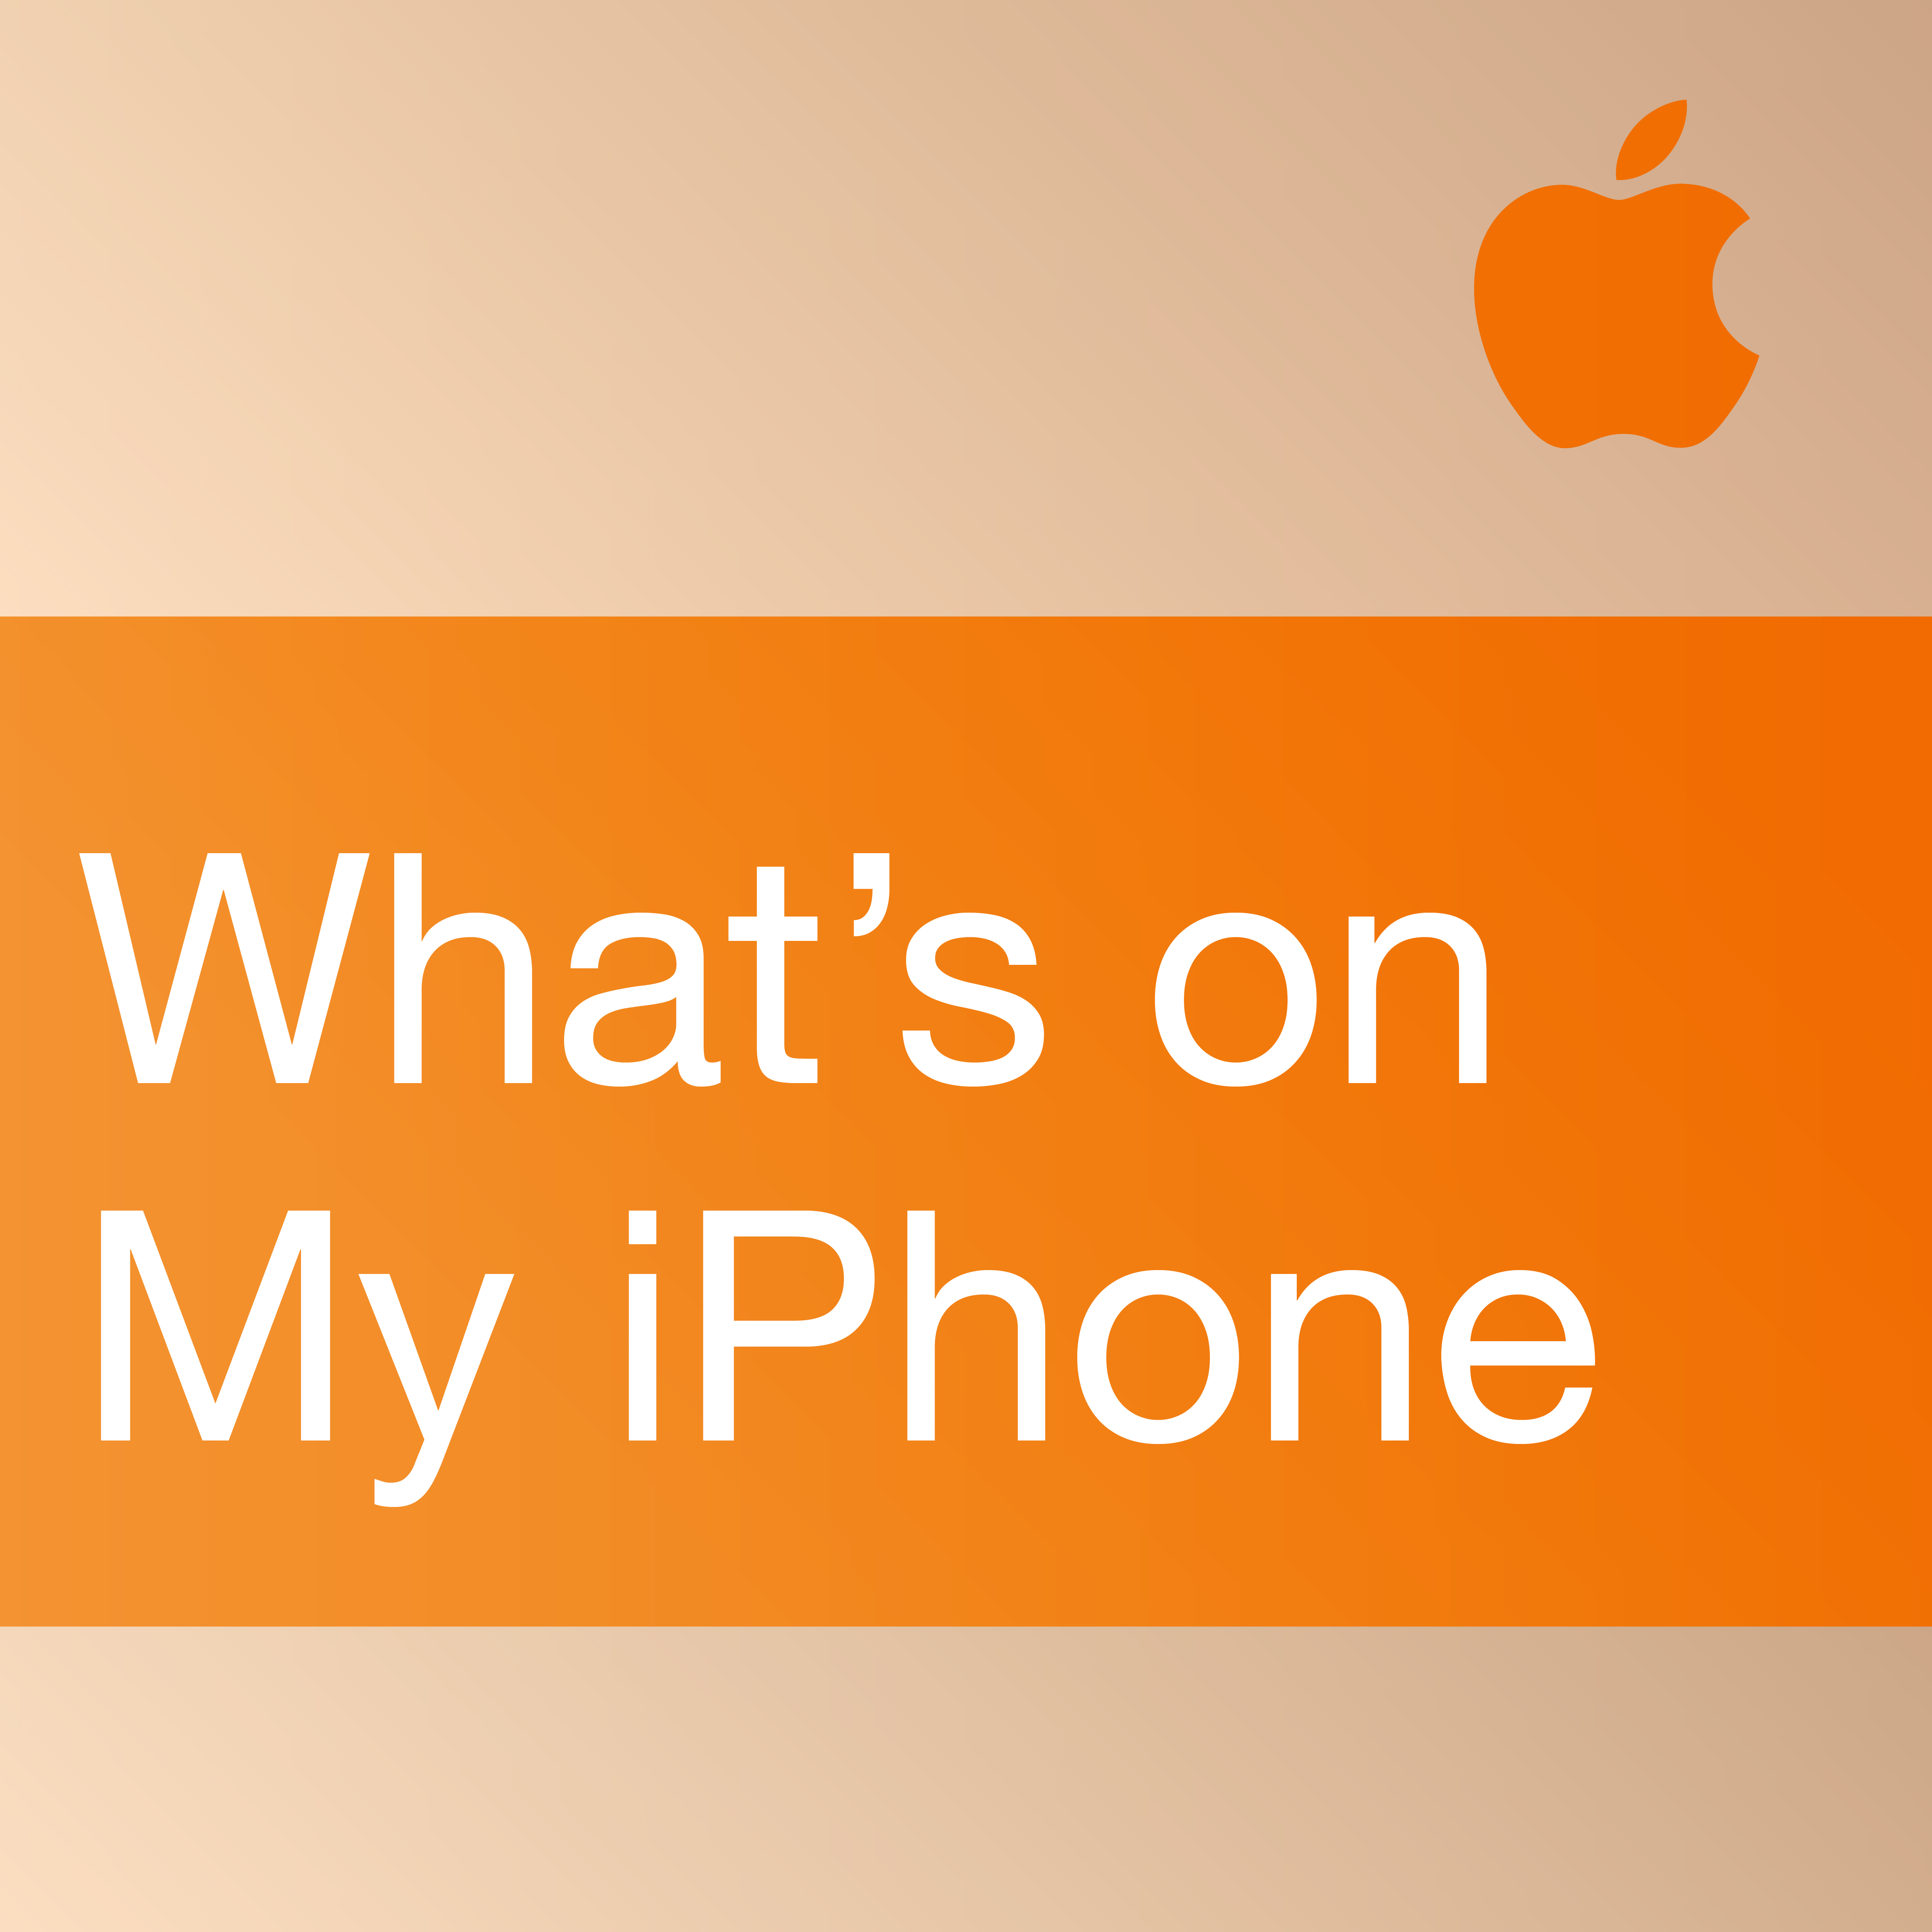 iPhone in Business: What's on My iPhone